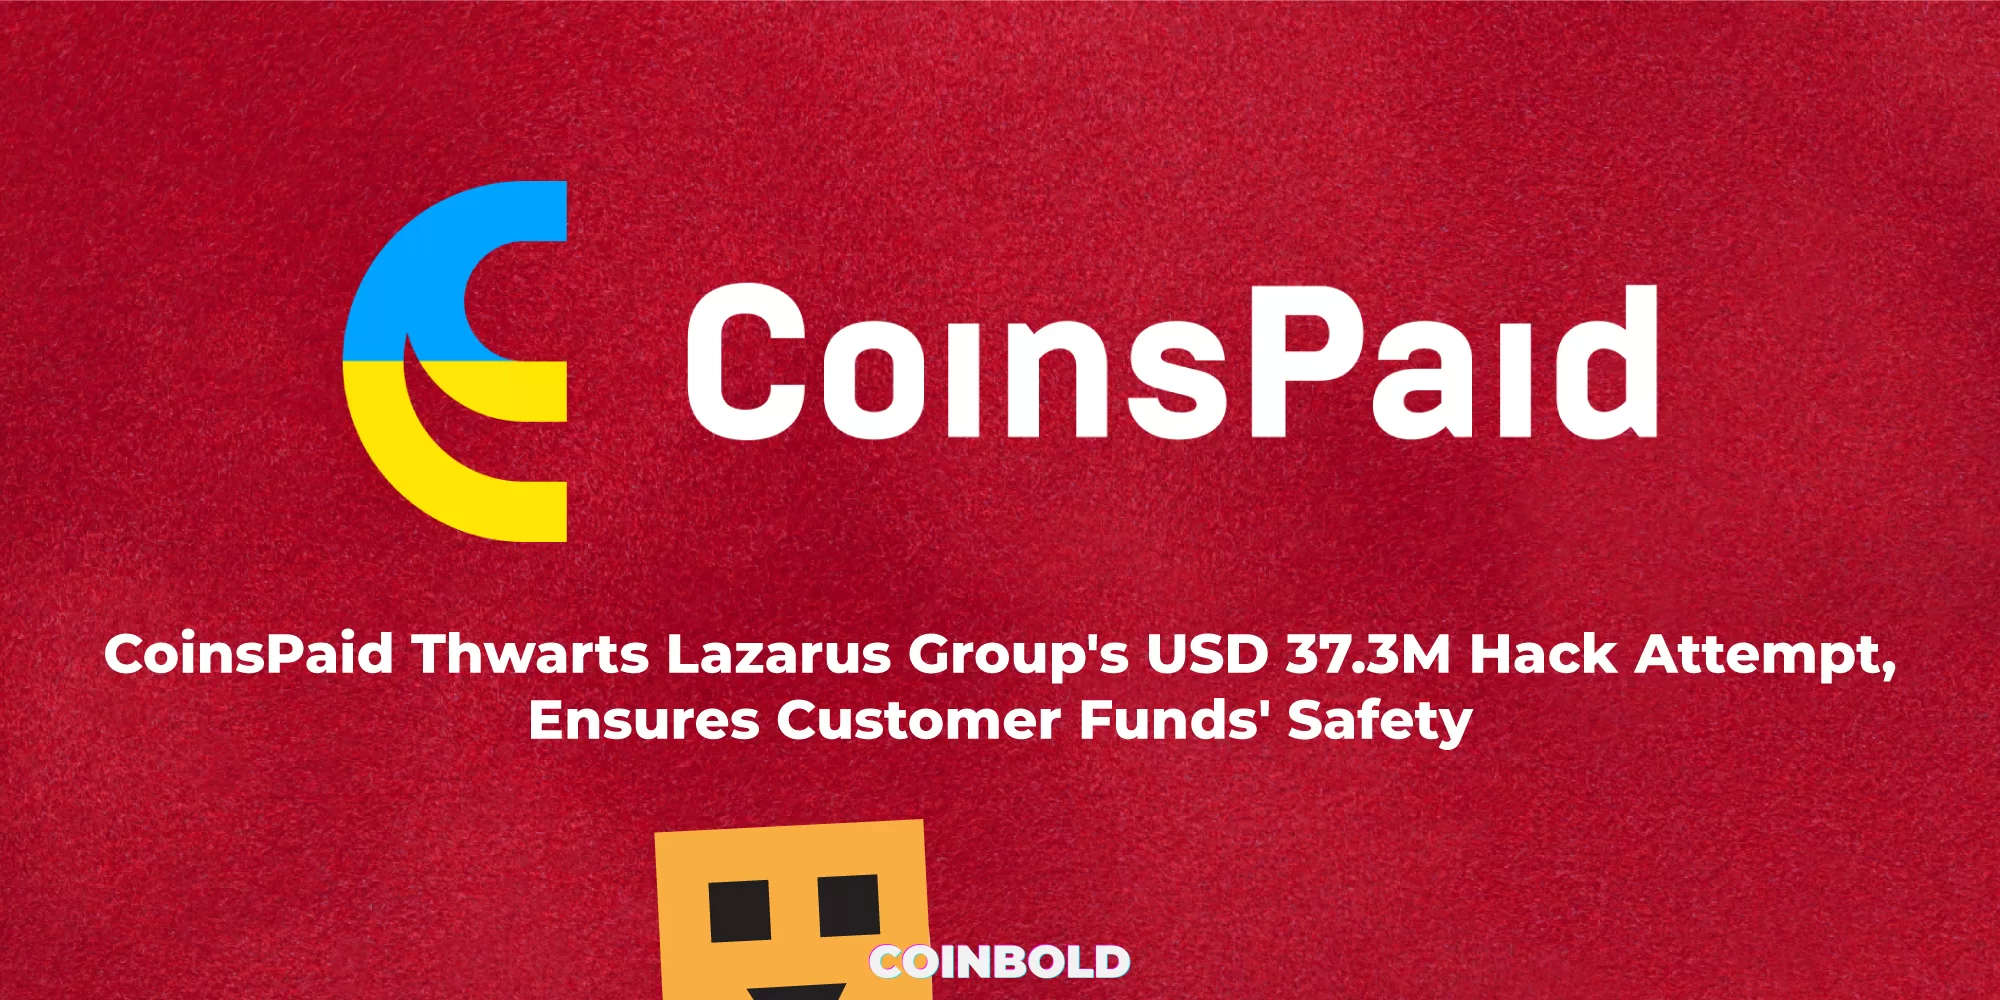 CoinsPaid Thwarts Lazarus Group's USD 37.3M Hack Attempt, Ensures Customer Funds' Safety